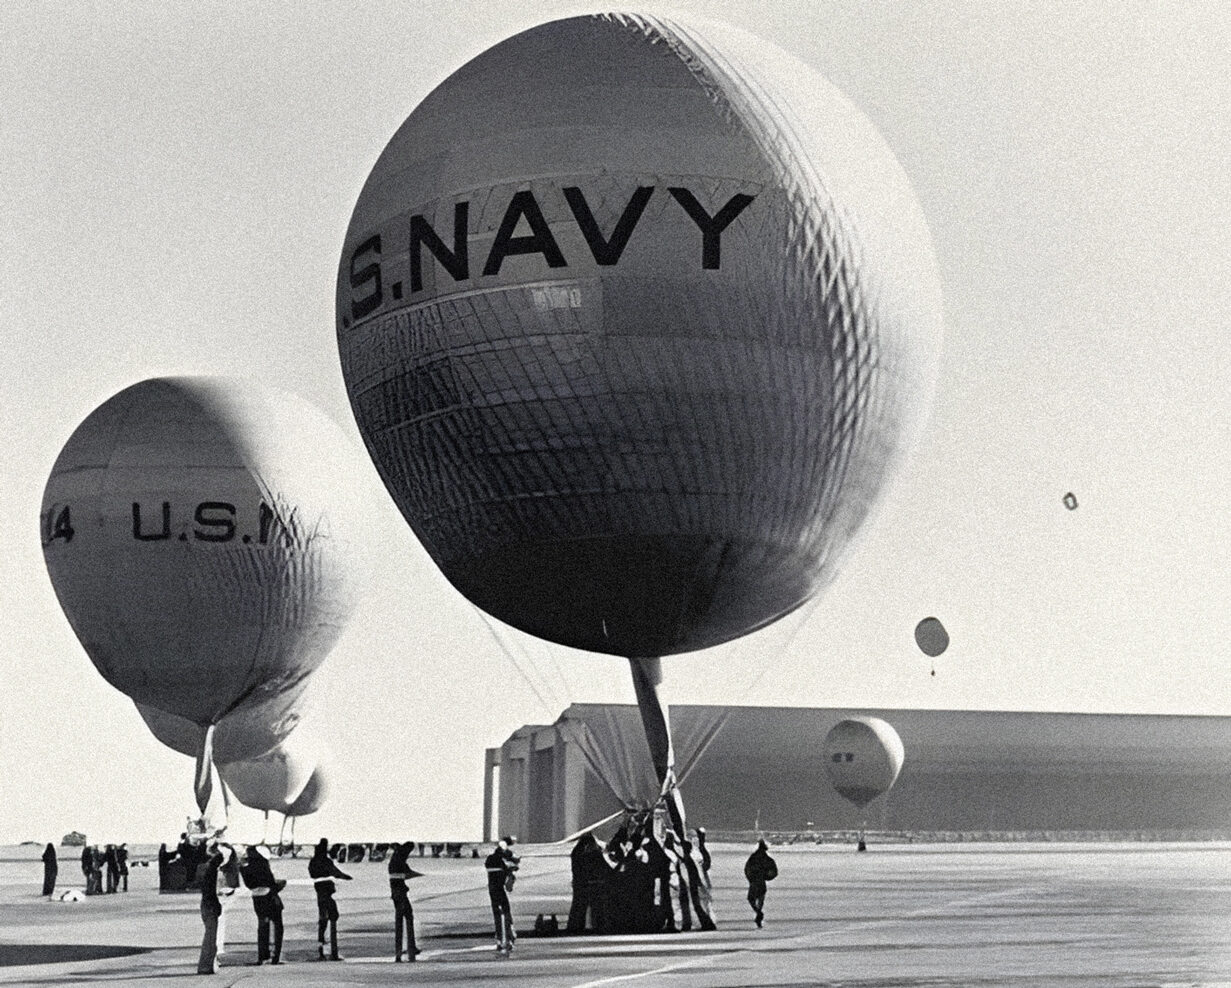 Ground crews prepare 6 large balloons, with U.S.NAVY written on their surfaces, for flight. In the distance, 2 balloons soar above Hangars 2 and 3.